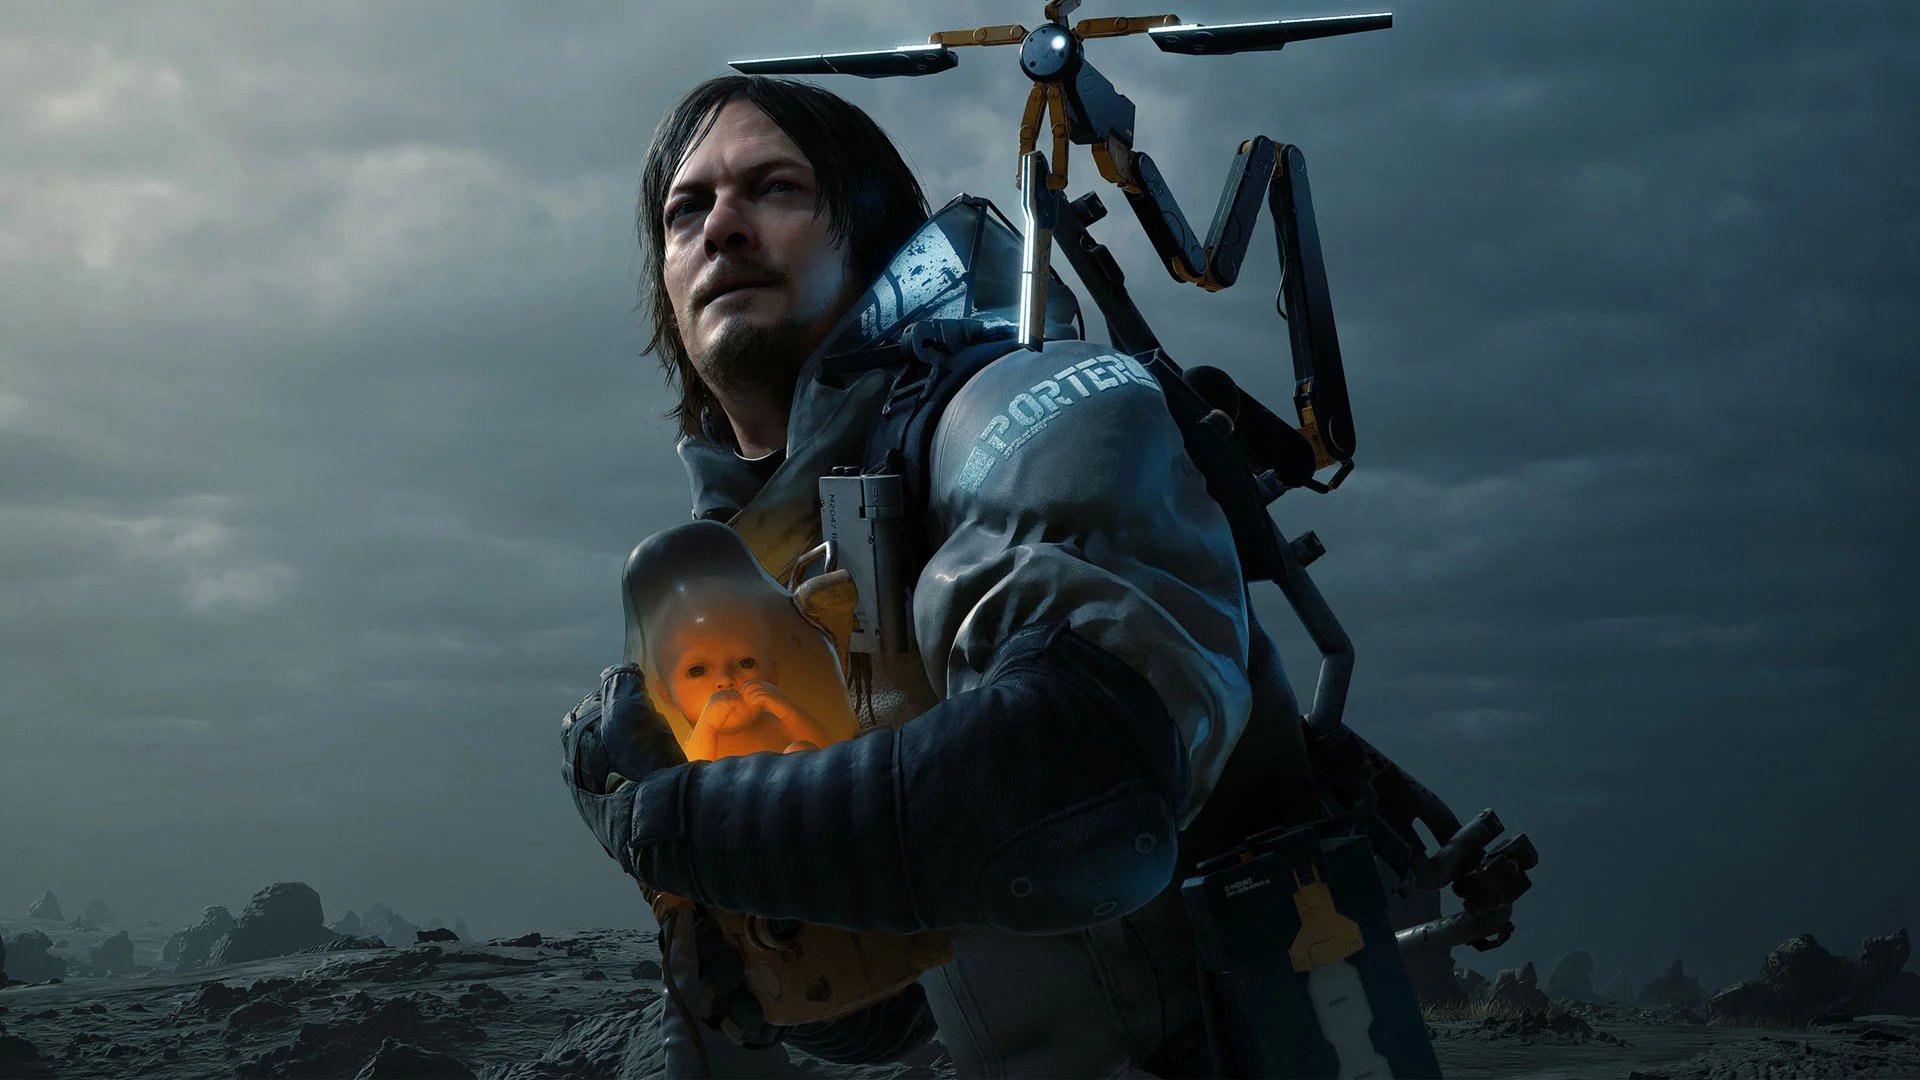 death stranding ps4 store